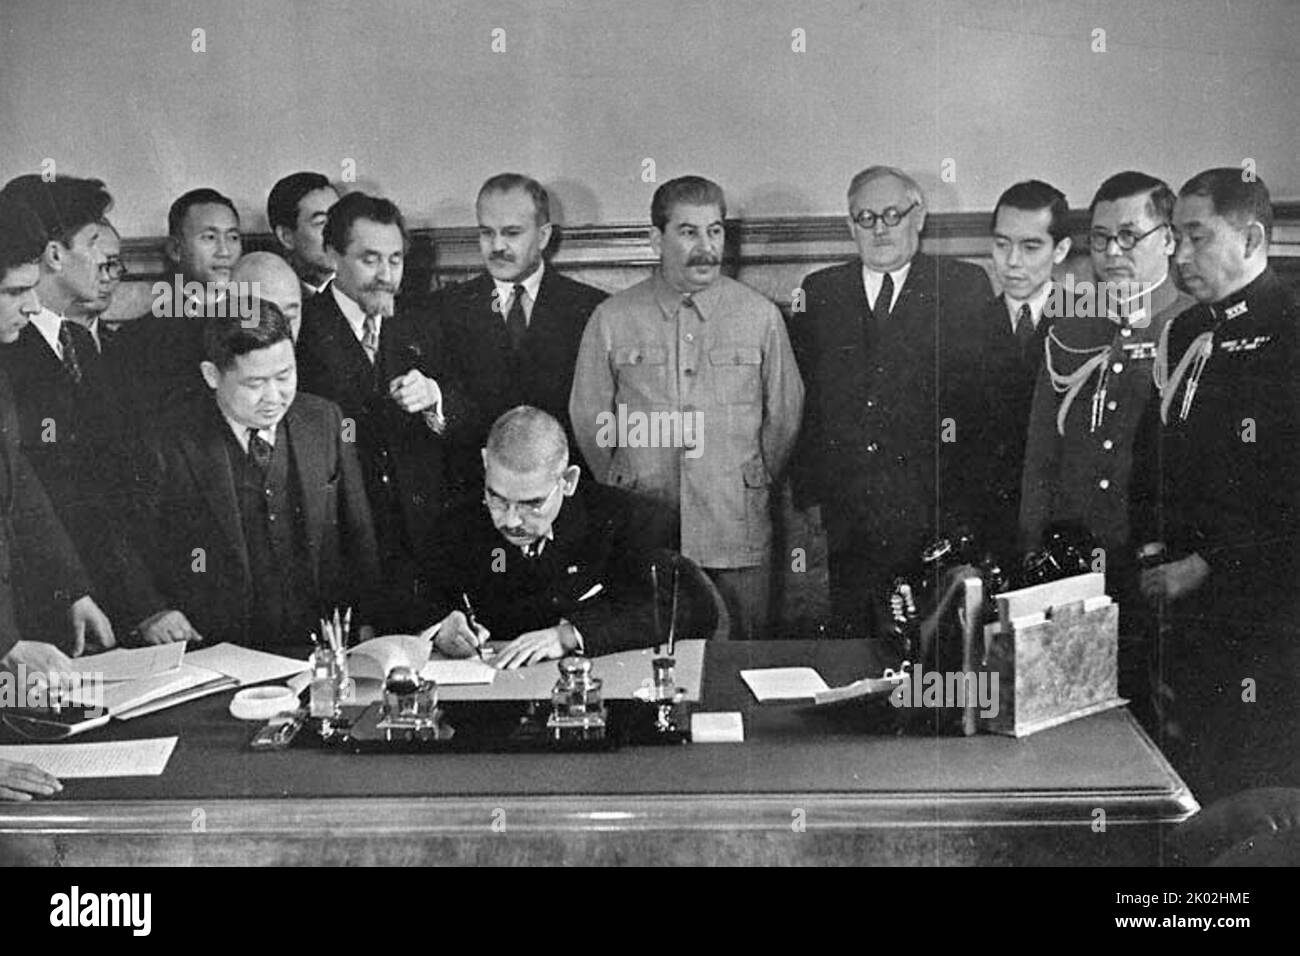 Japanese Foreign Minister I. Matsuoka signs the Pact of Neutrality between the USSR and Japan . Present: J.V. Stalin, People's Commissar for Foreign Affairs of the USSR V. Molotov, Deputy. People's Commissar for Foreign Affairs of the USSR S.A. Lozovsky, A.Ya. Vishinski. 13 April 1941 Stock Photo